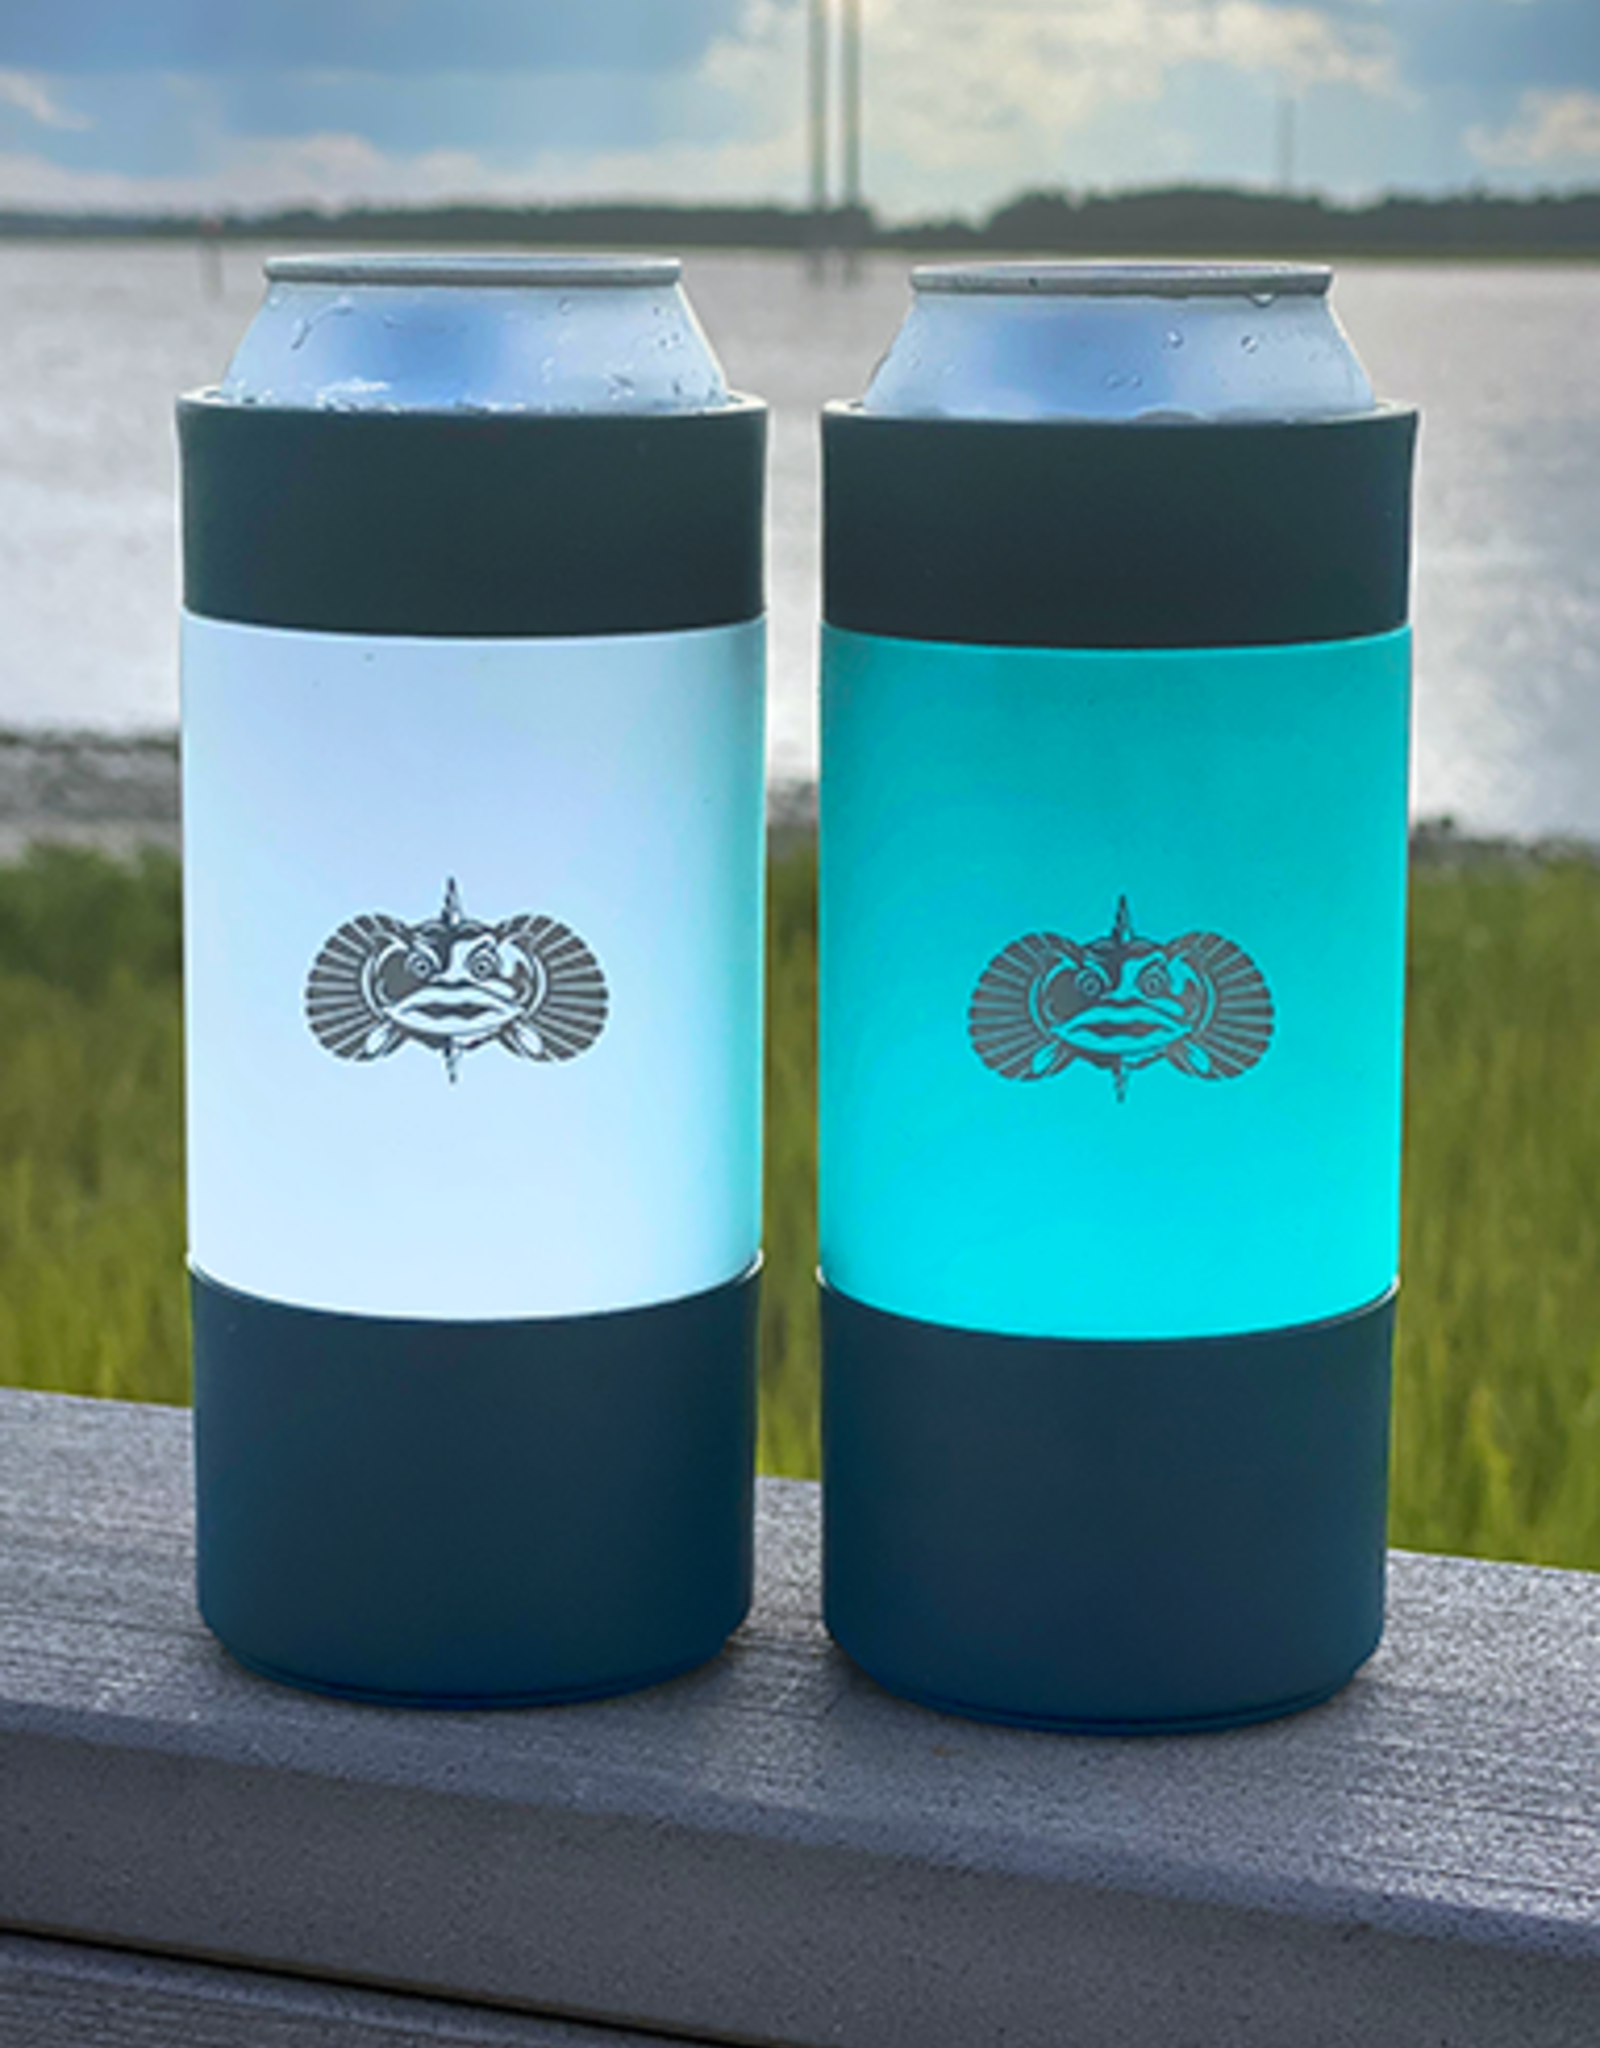 Toadfish Toadfish Non-Tipping 16 oz Can Cooler - Teal